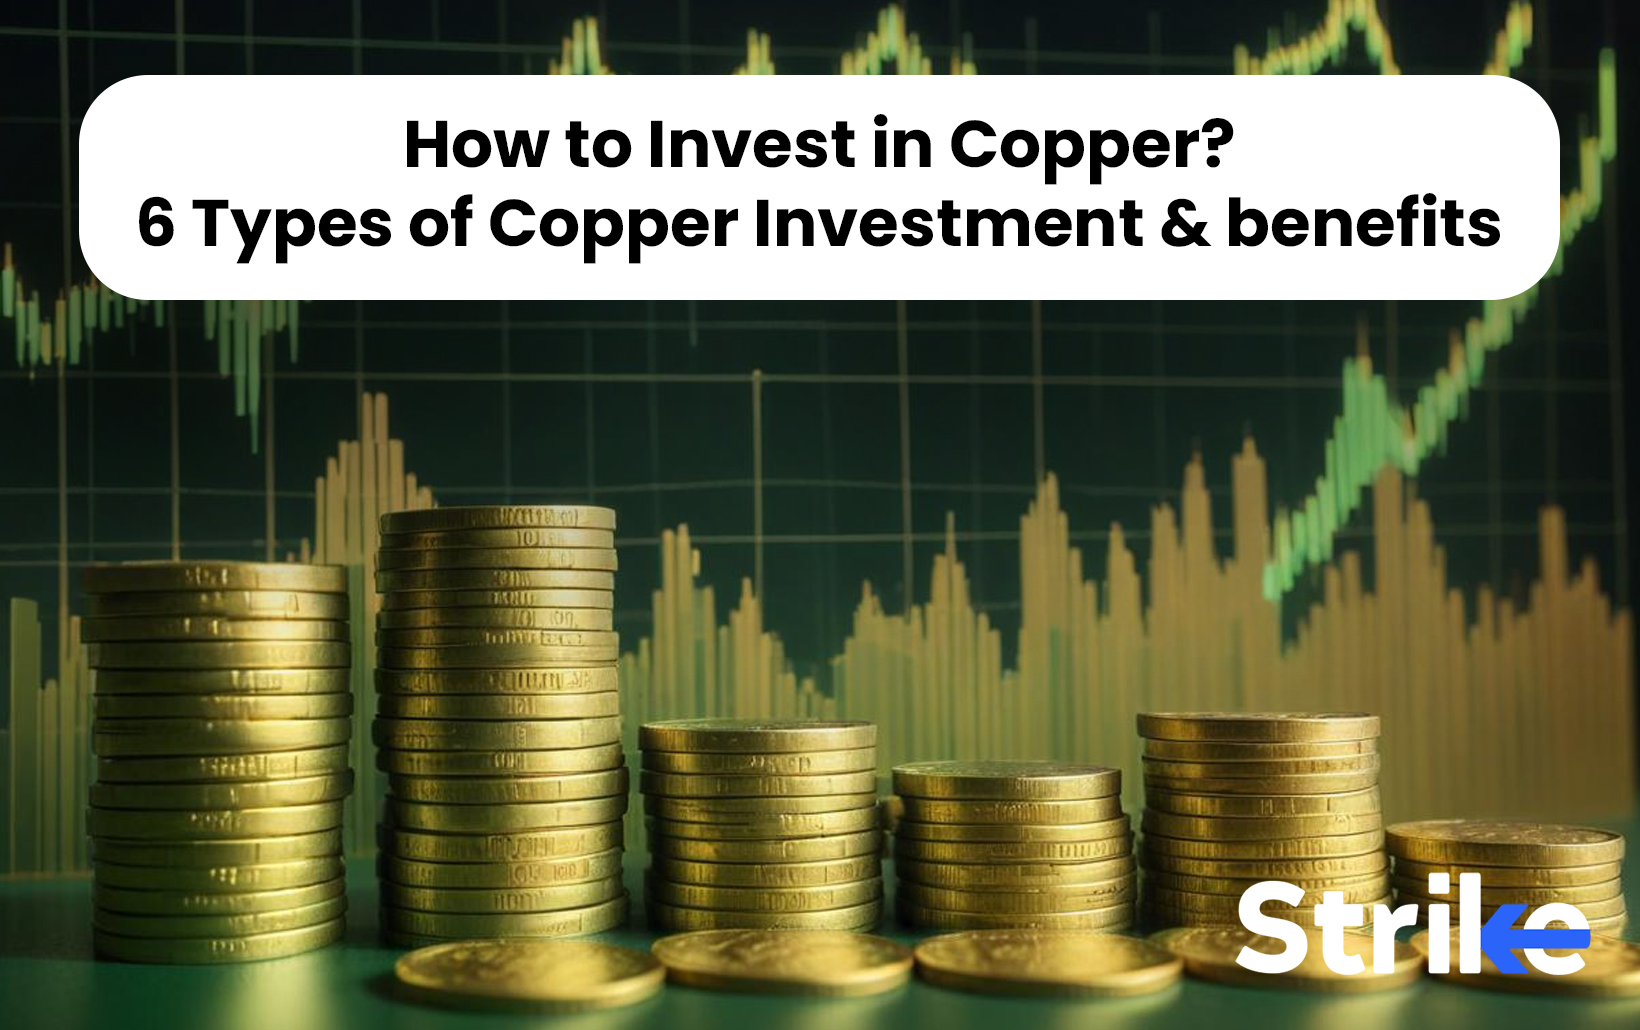 How to Invest in Copper? 6 Types of Copper Investment & benefits